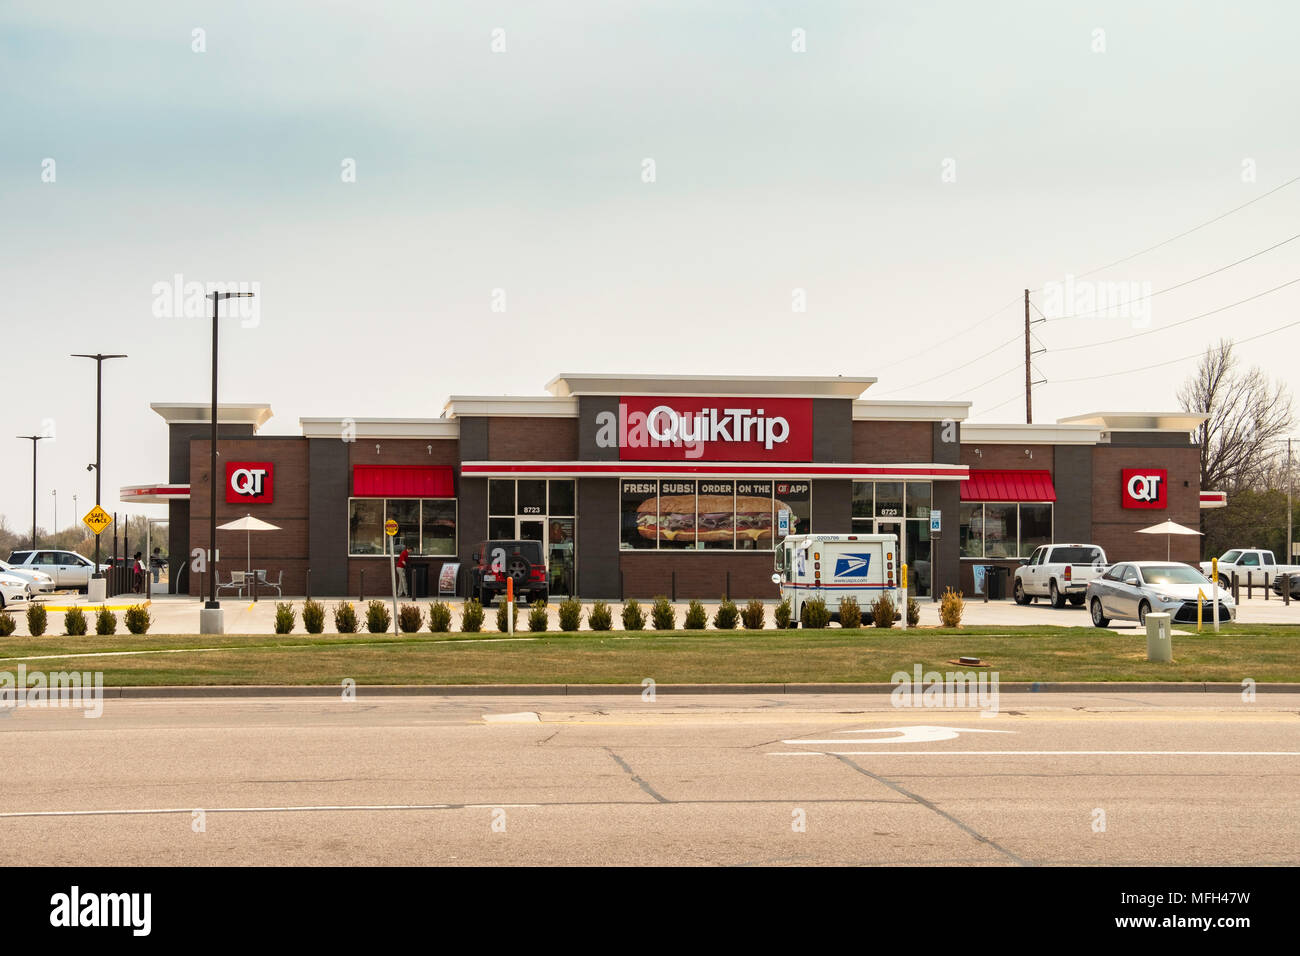 The exterior and entrance of a QuckTrip or QT convenience store in Wichita, Kansas, USA. Stock Photo